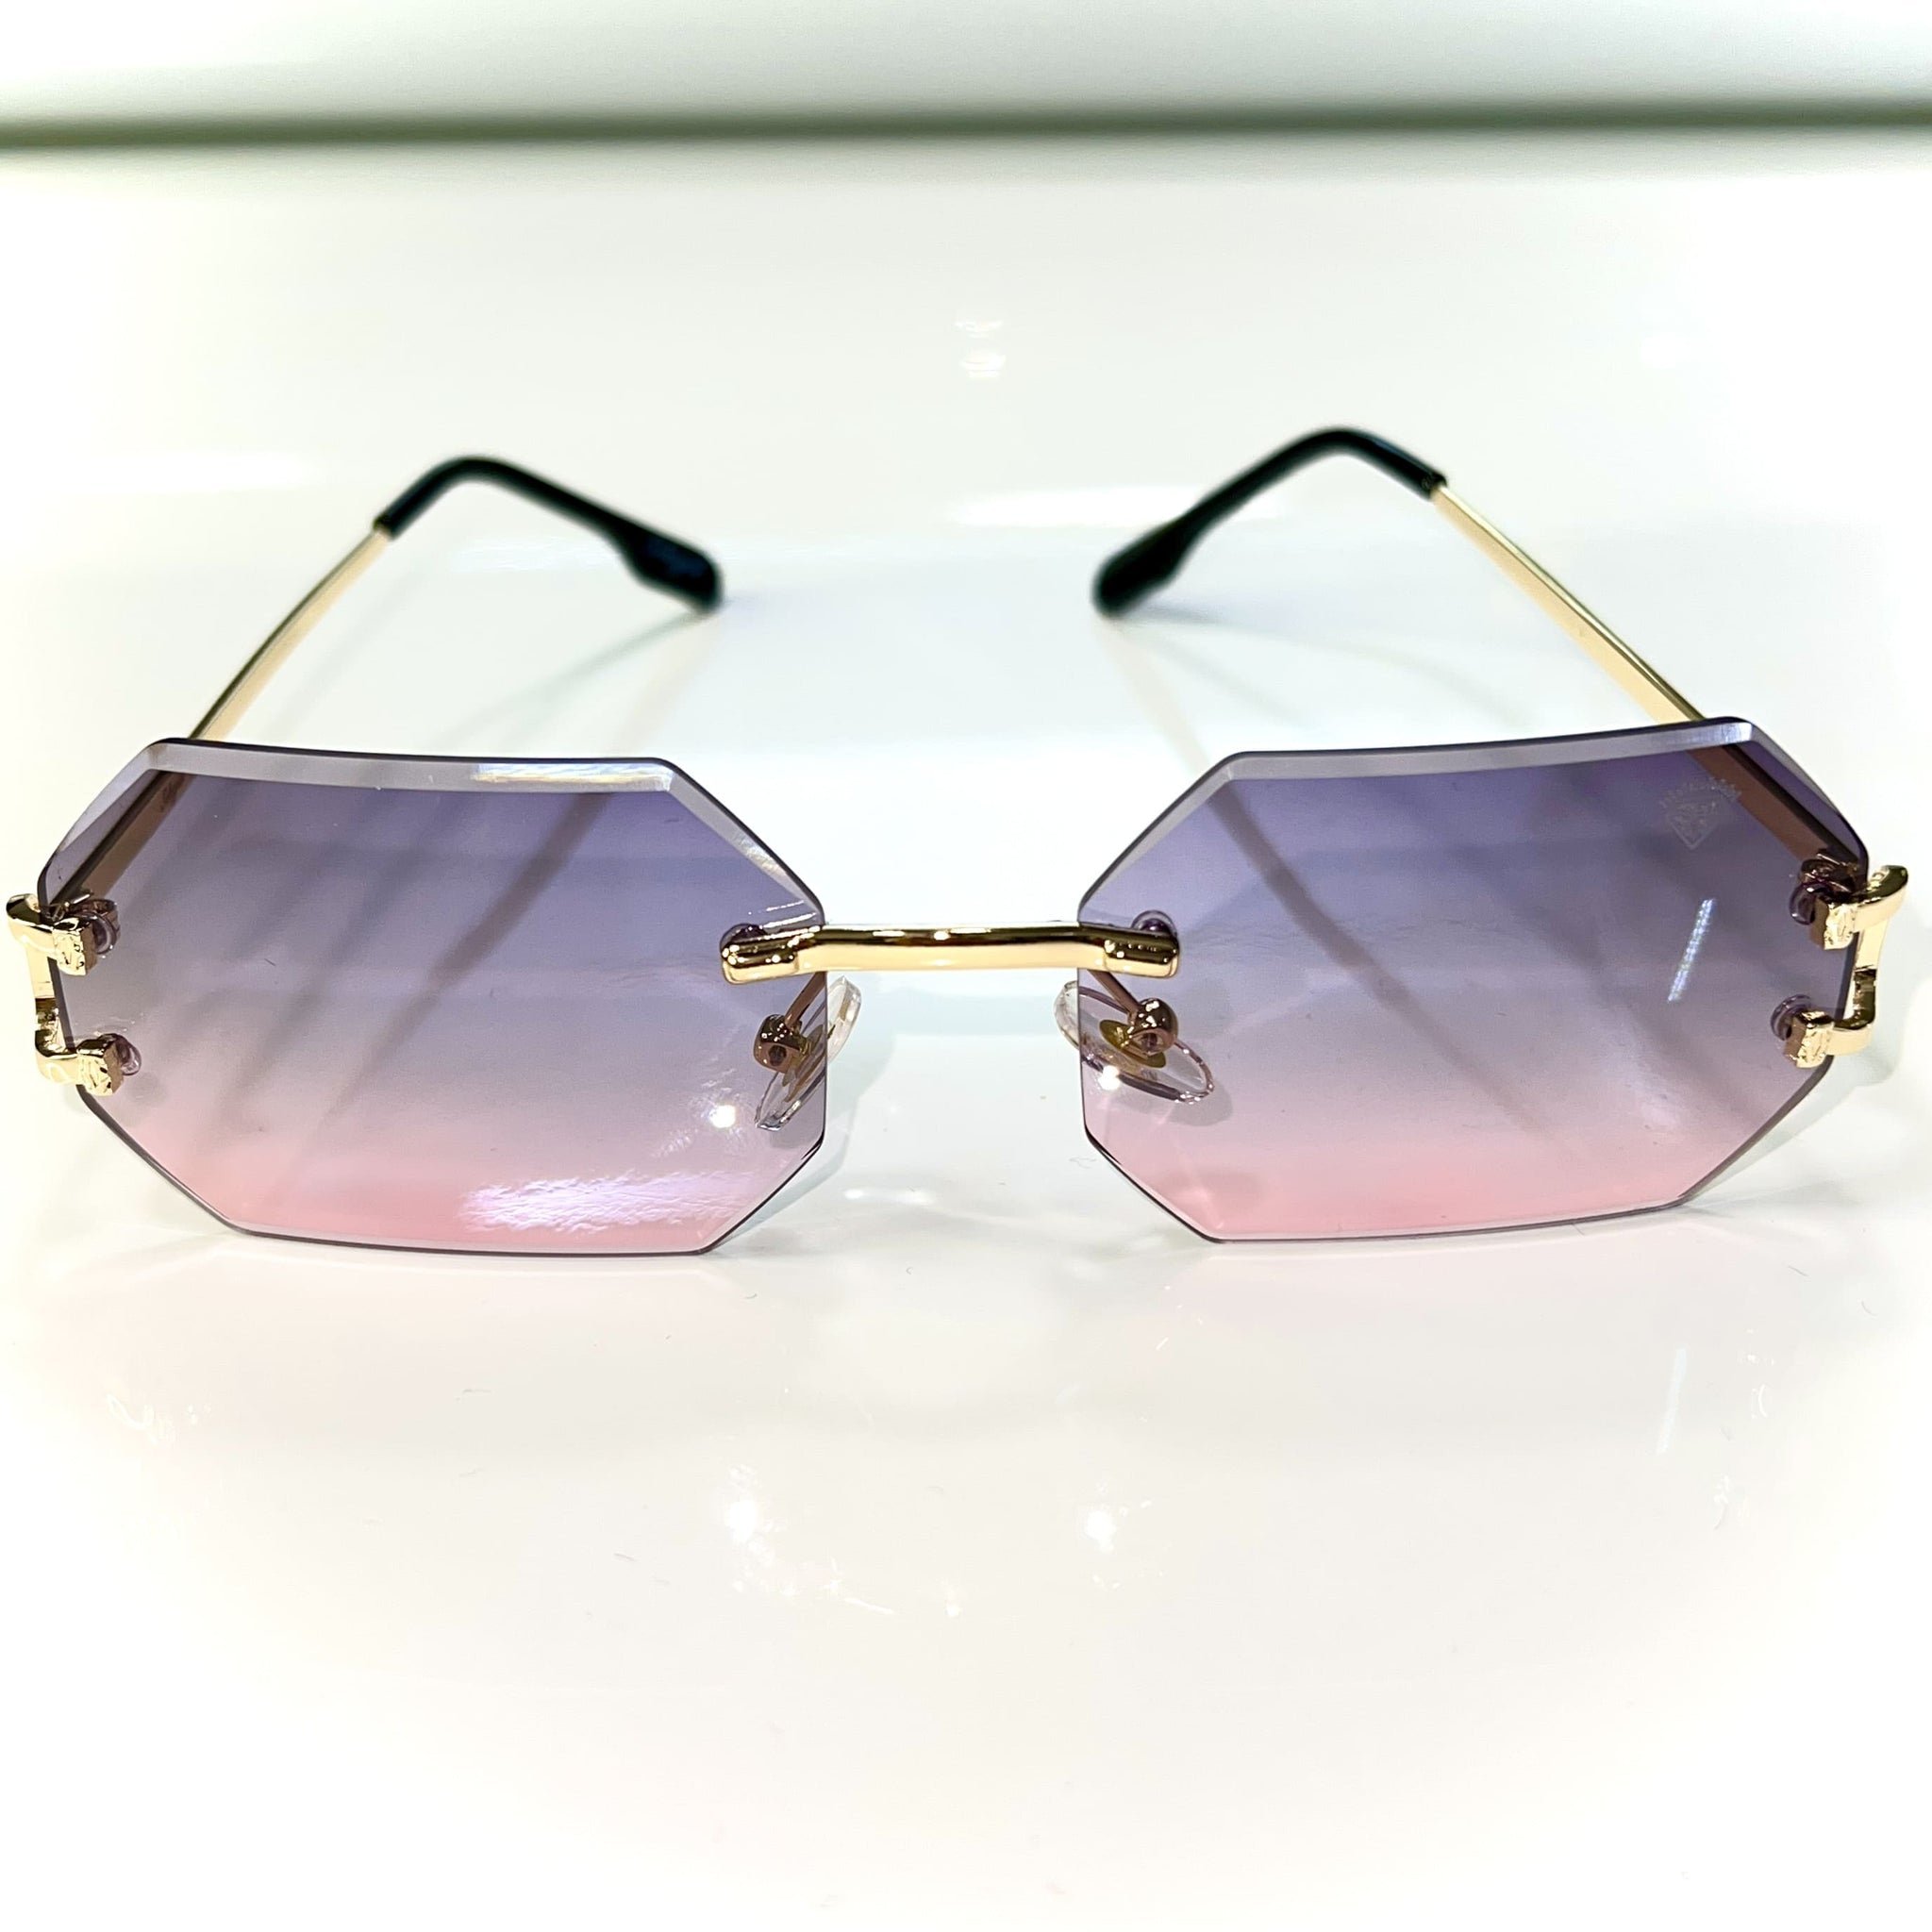 Sparkle Glasses - Diamond Cut -  14k gold plated - Purple/Pink Shade - Sehgal Glasses